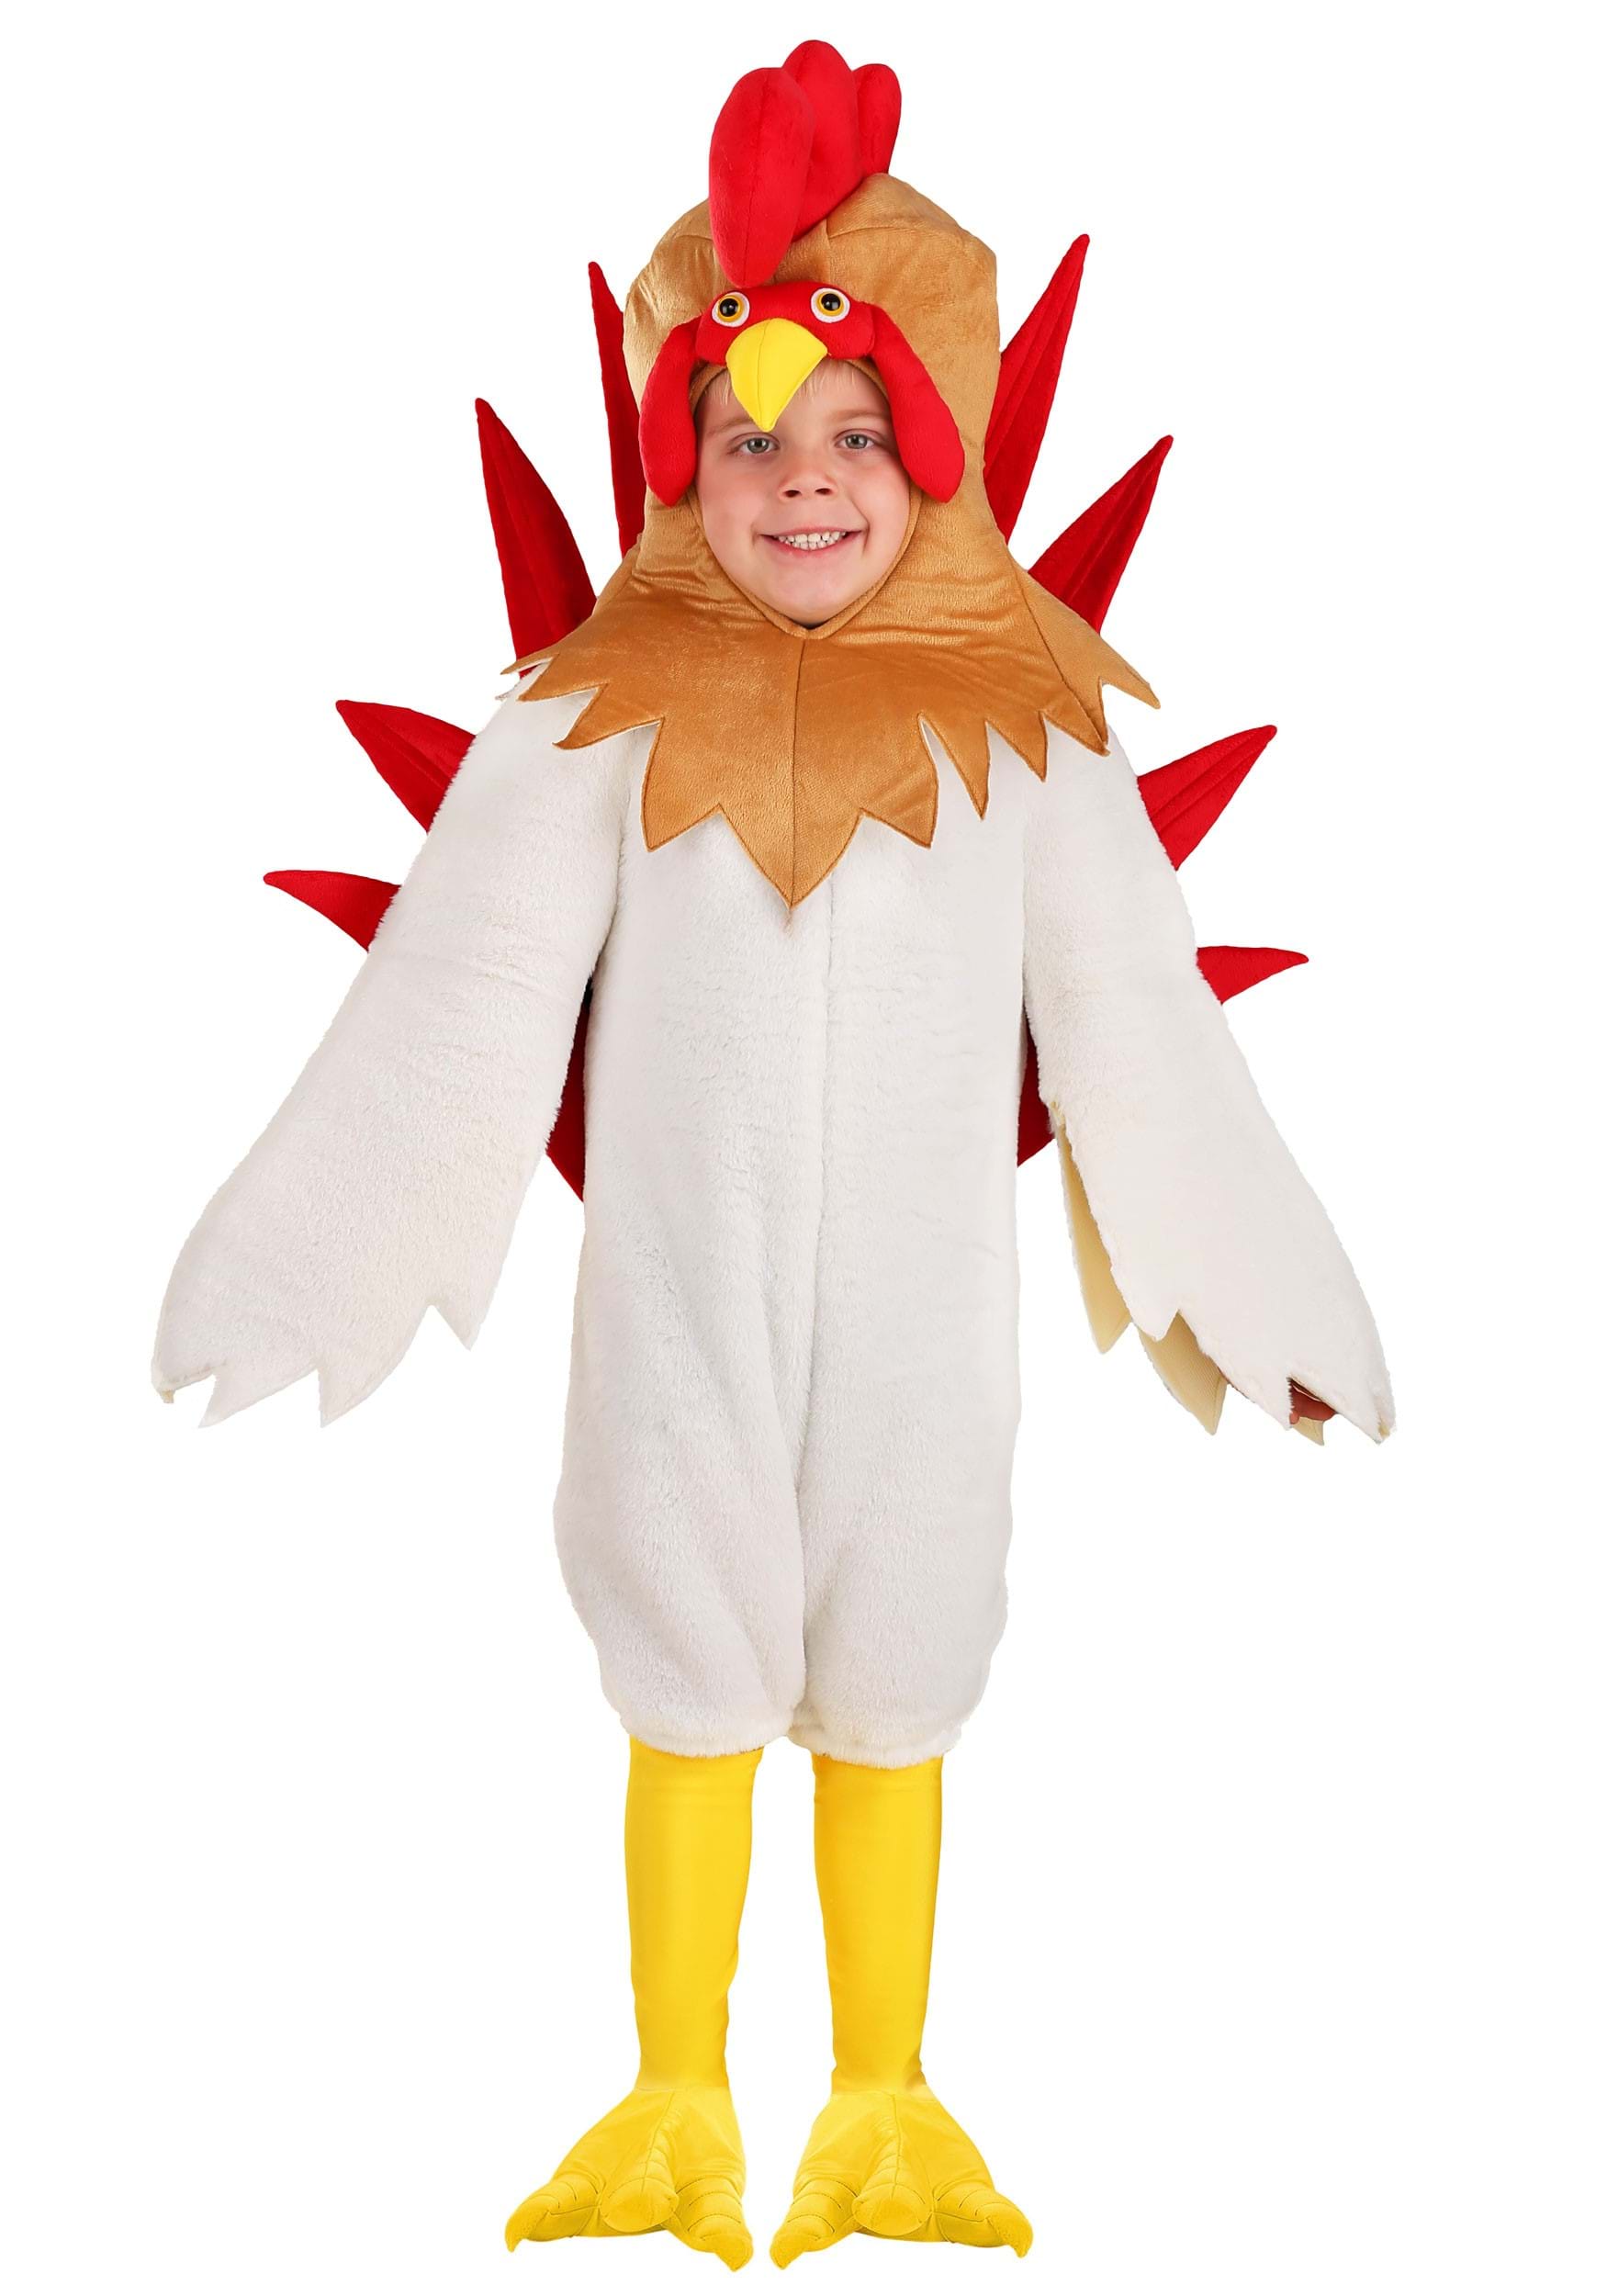 Photos - Fancy Dress Toddler FUN Costumes  Farm Rooster Costume White/Red/Yellow FUN6832 